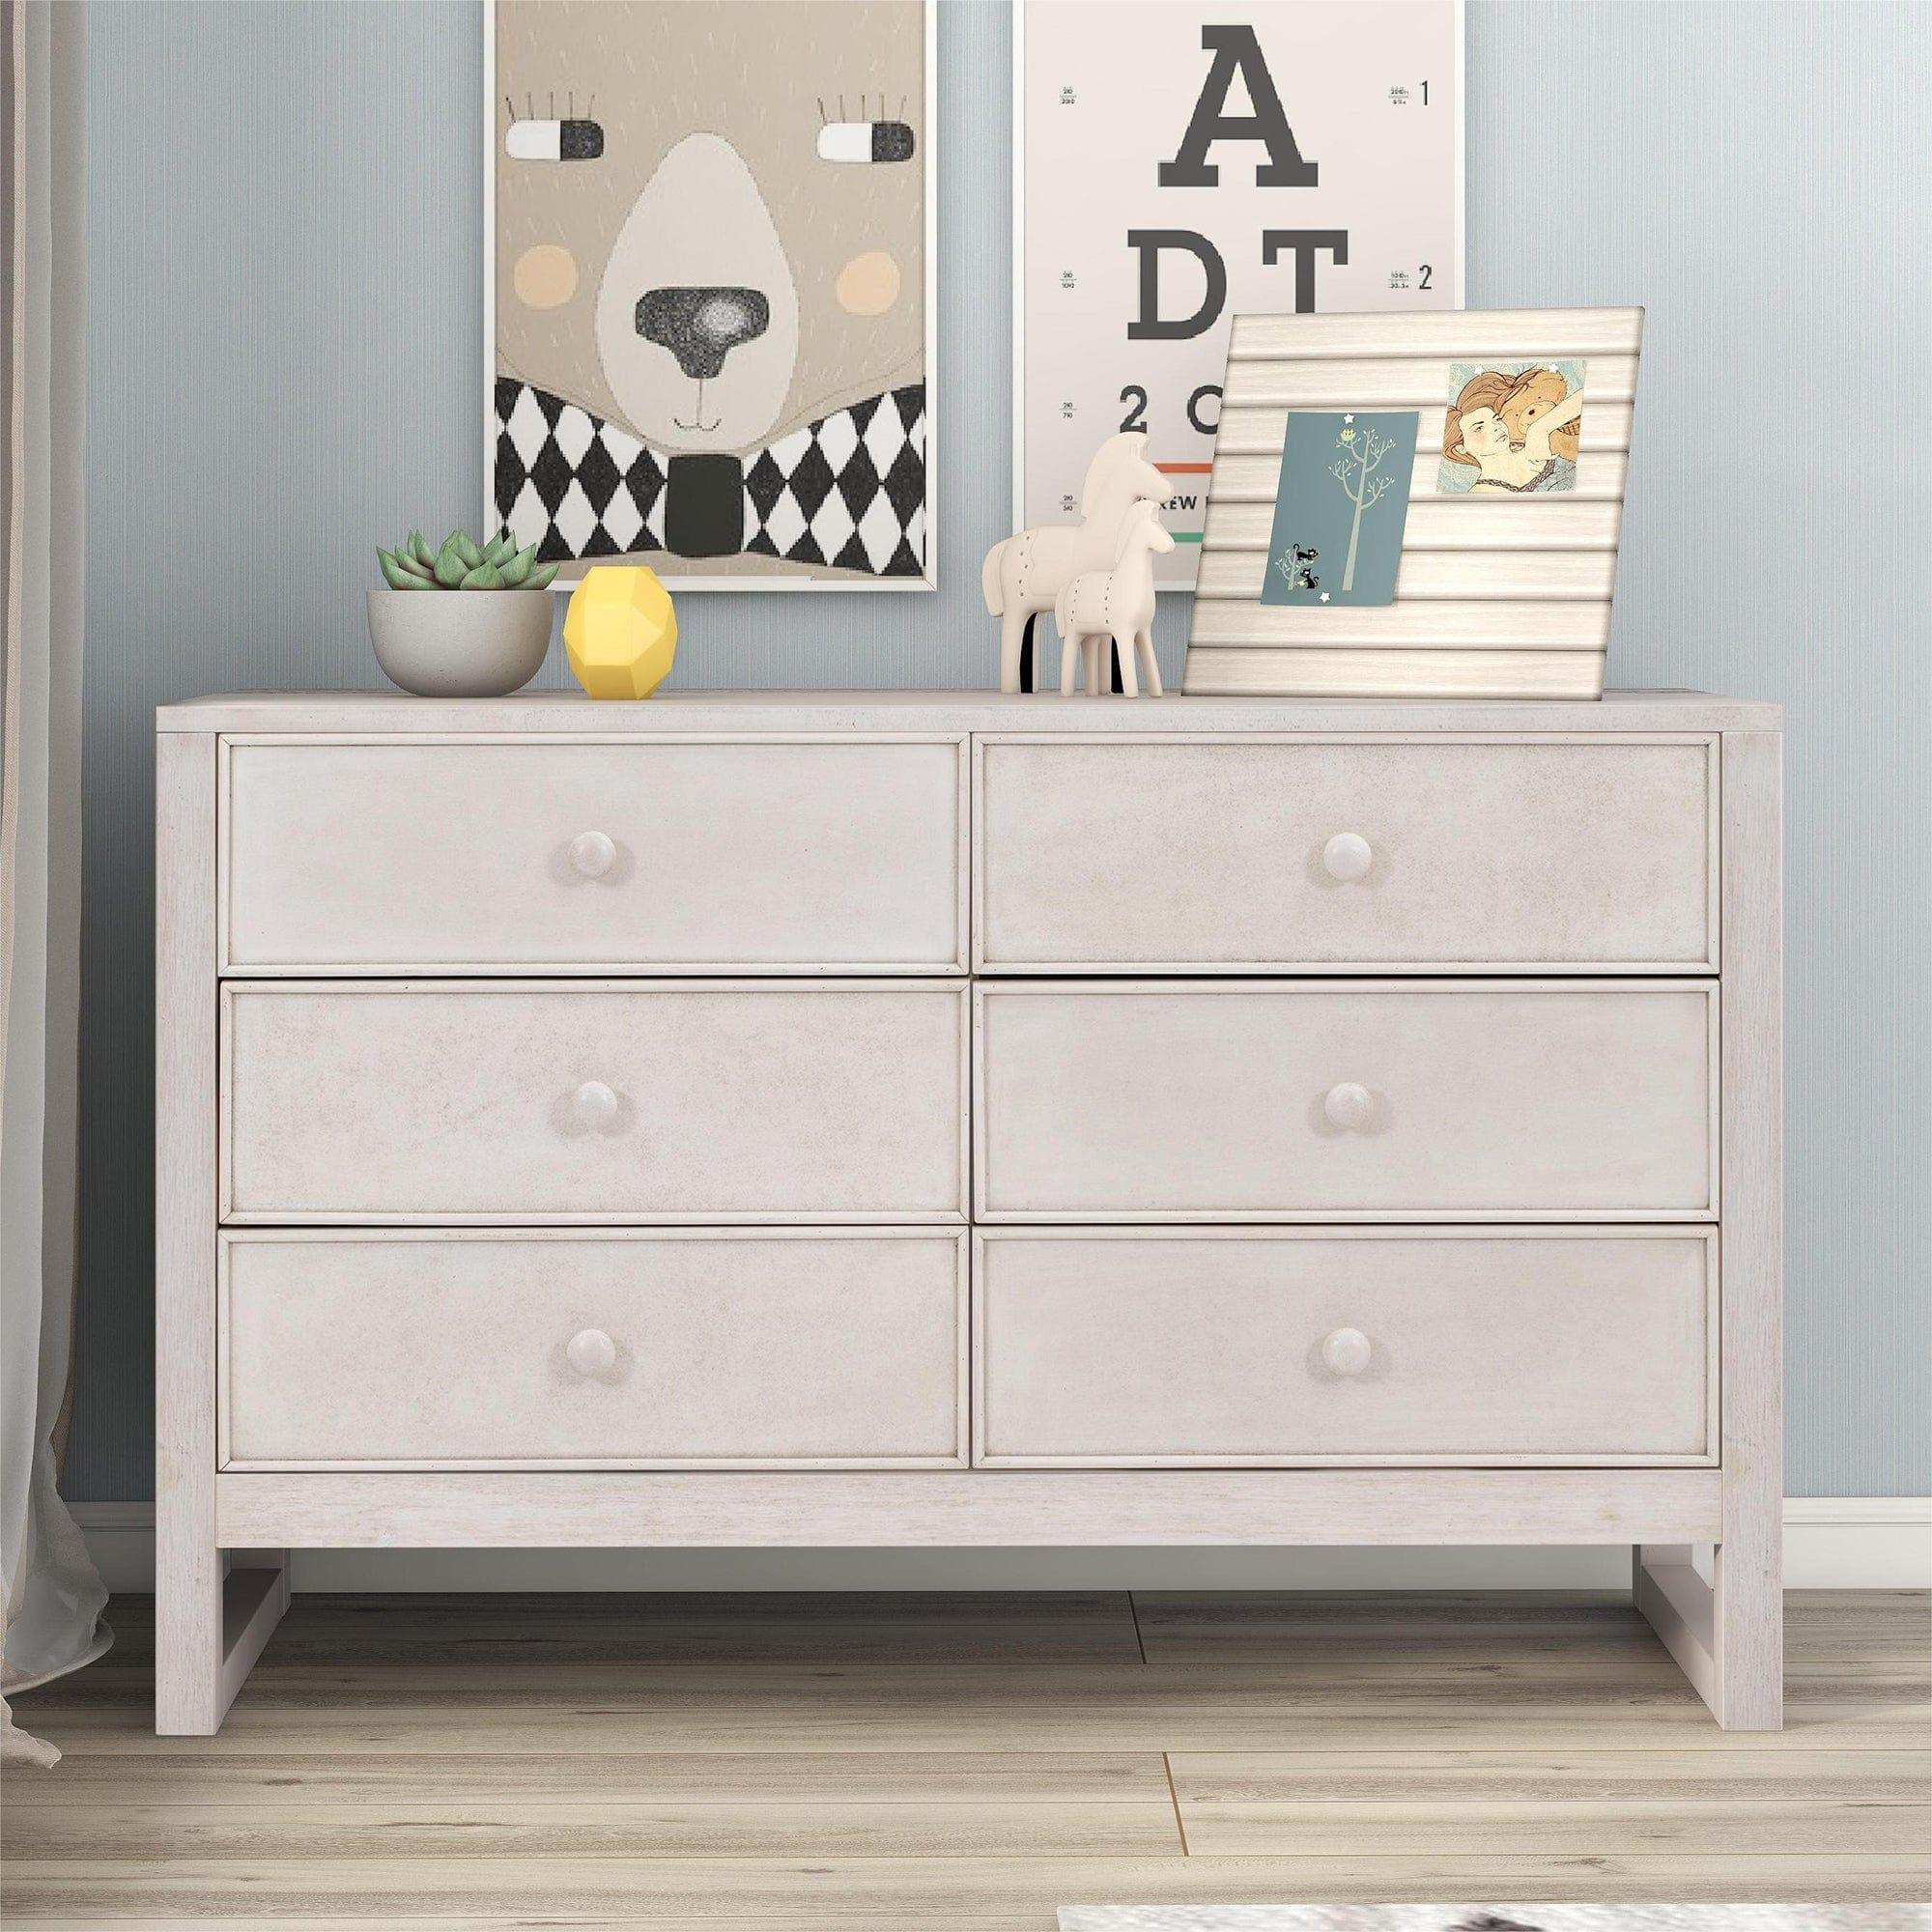 Shop Rustic Wooden Dresser with 6 Drawers,Storage Cabinet for Bedroom,Anitque White Mademoiselle Home Decor